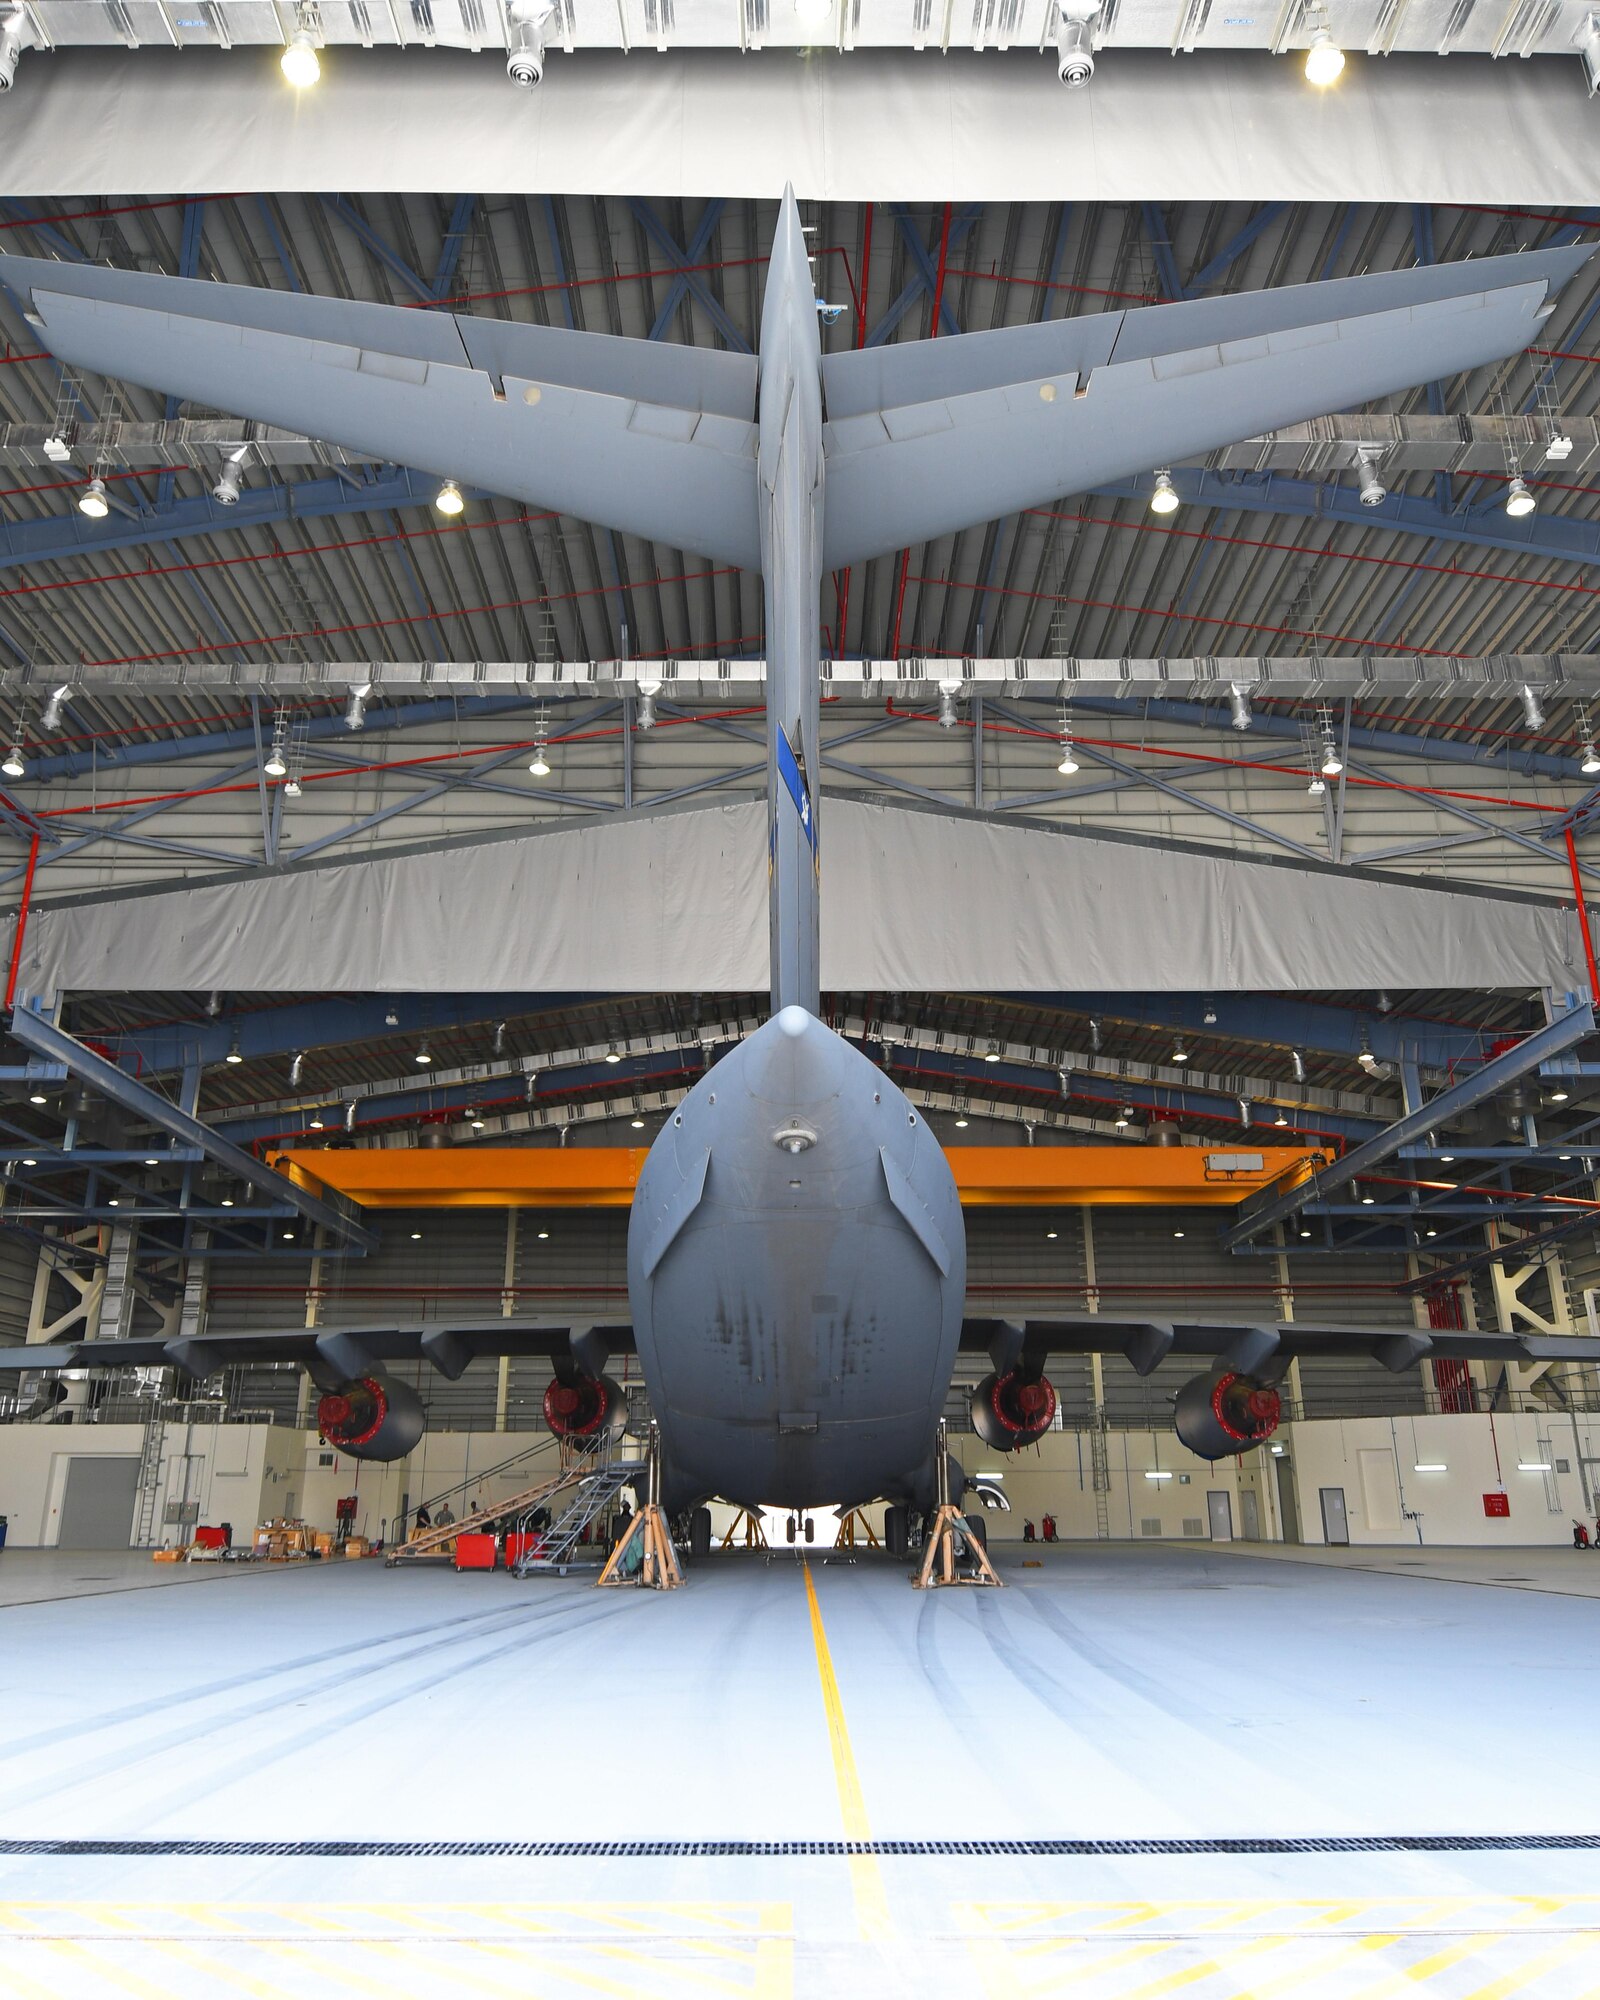 A U.S. Air Force C-17 Globemaster III is lifted inside a Qatari hangar at Al Udeid Air Base, Qatar, Feb. 25, 2017. Weather conditions such as high winds required maintenance personnel to stop working on the C-17 for safety reasons, but by parking the aircraft in the Qatari hangar, the maintainers were able to work on it uninterrupted. (U.S. Air Force photo by Senior Airman Miles Wilson)